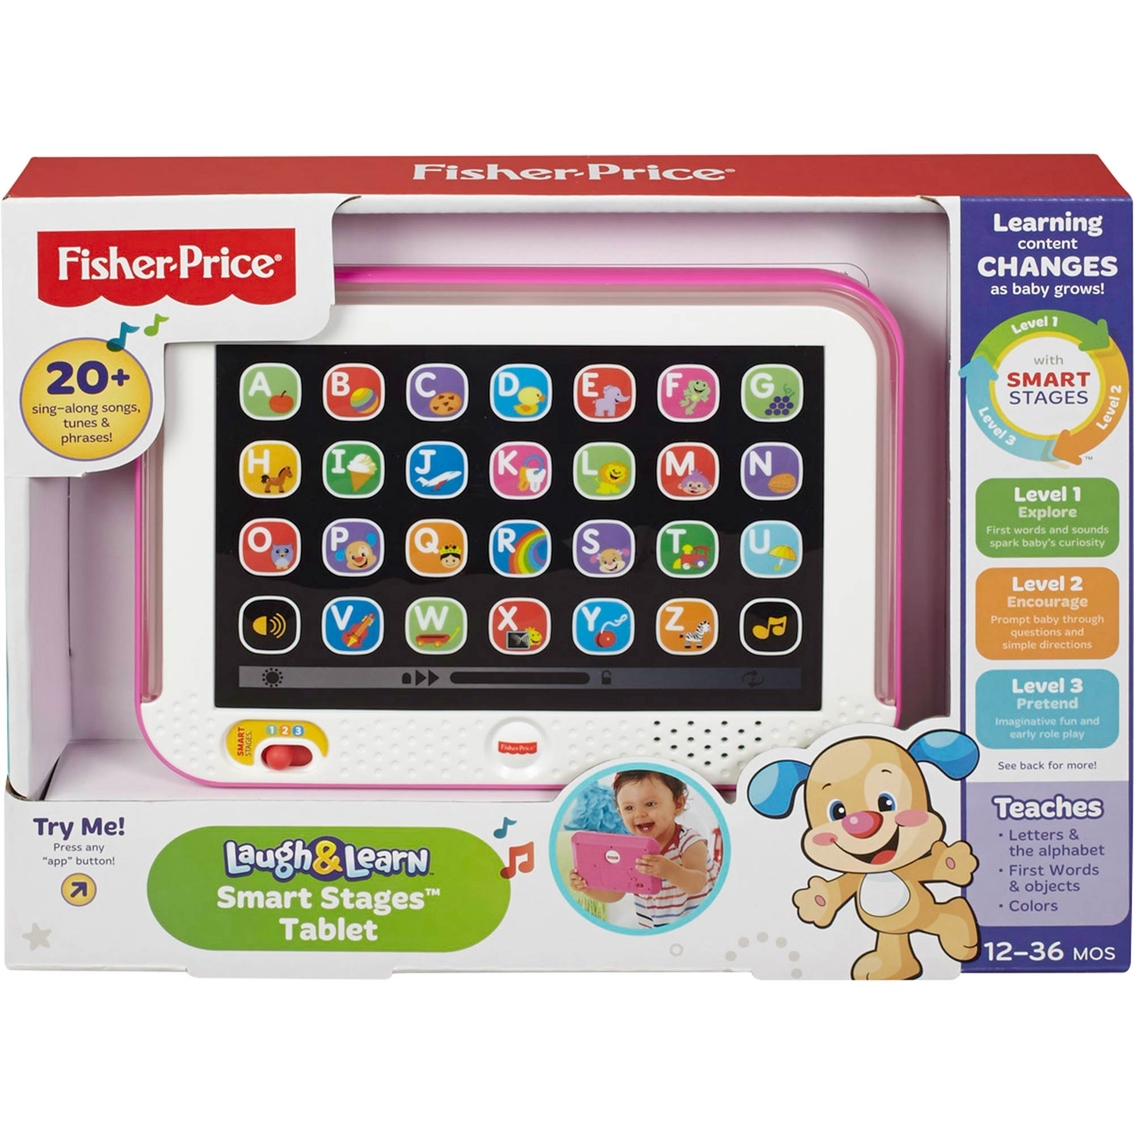 New Toy Toy Fisher Price Smart Tablet 